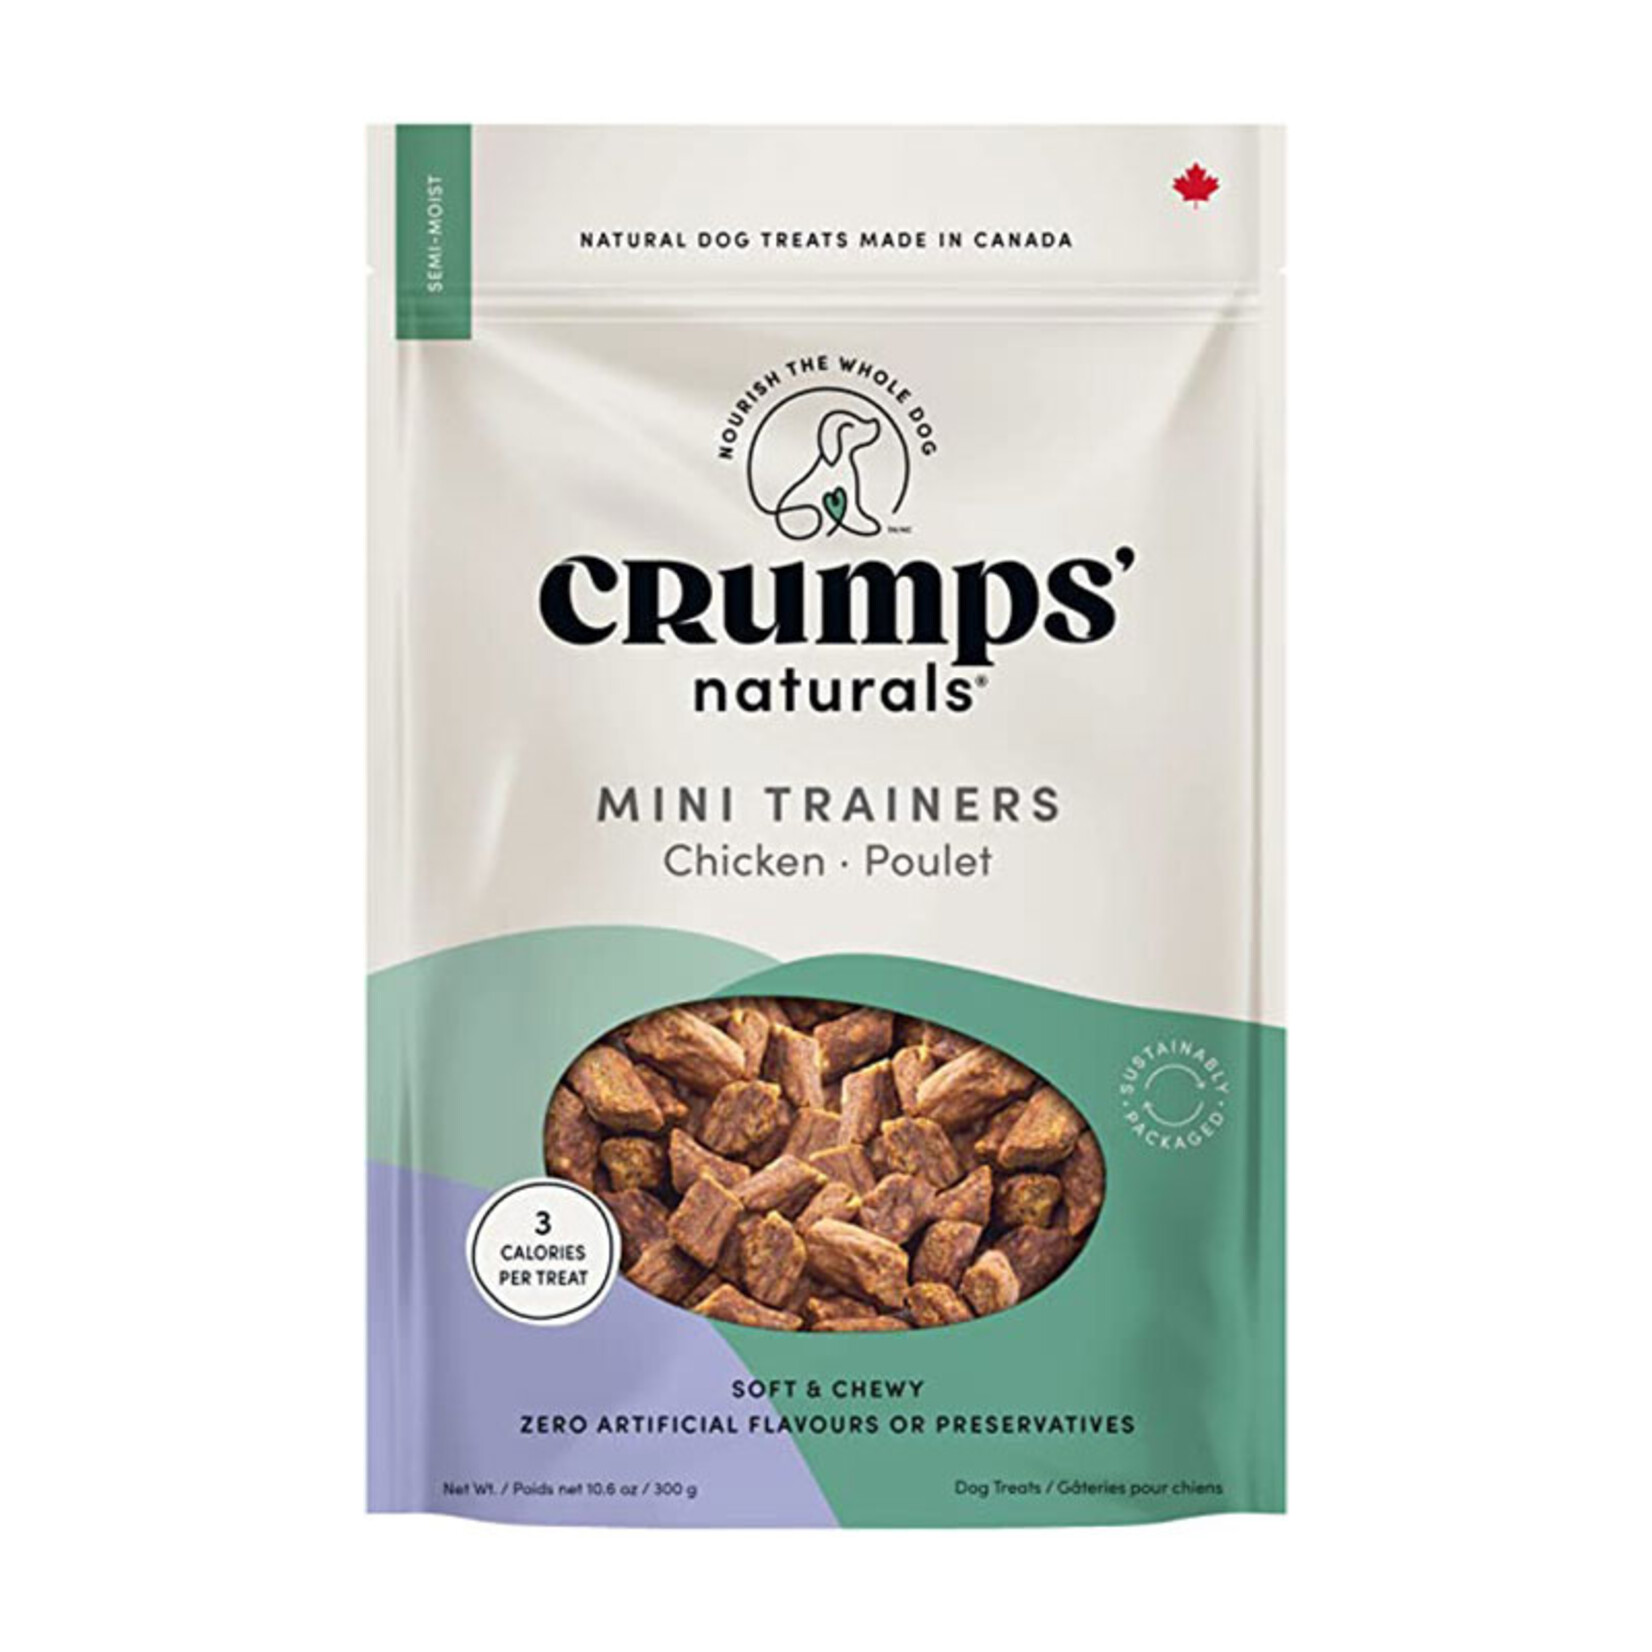 Crumps - Mini-Trainers - Soft & Chewy Chicken - 300g